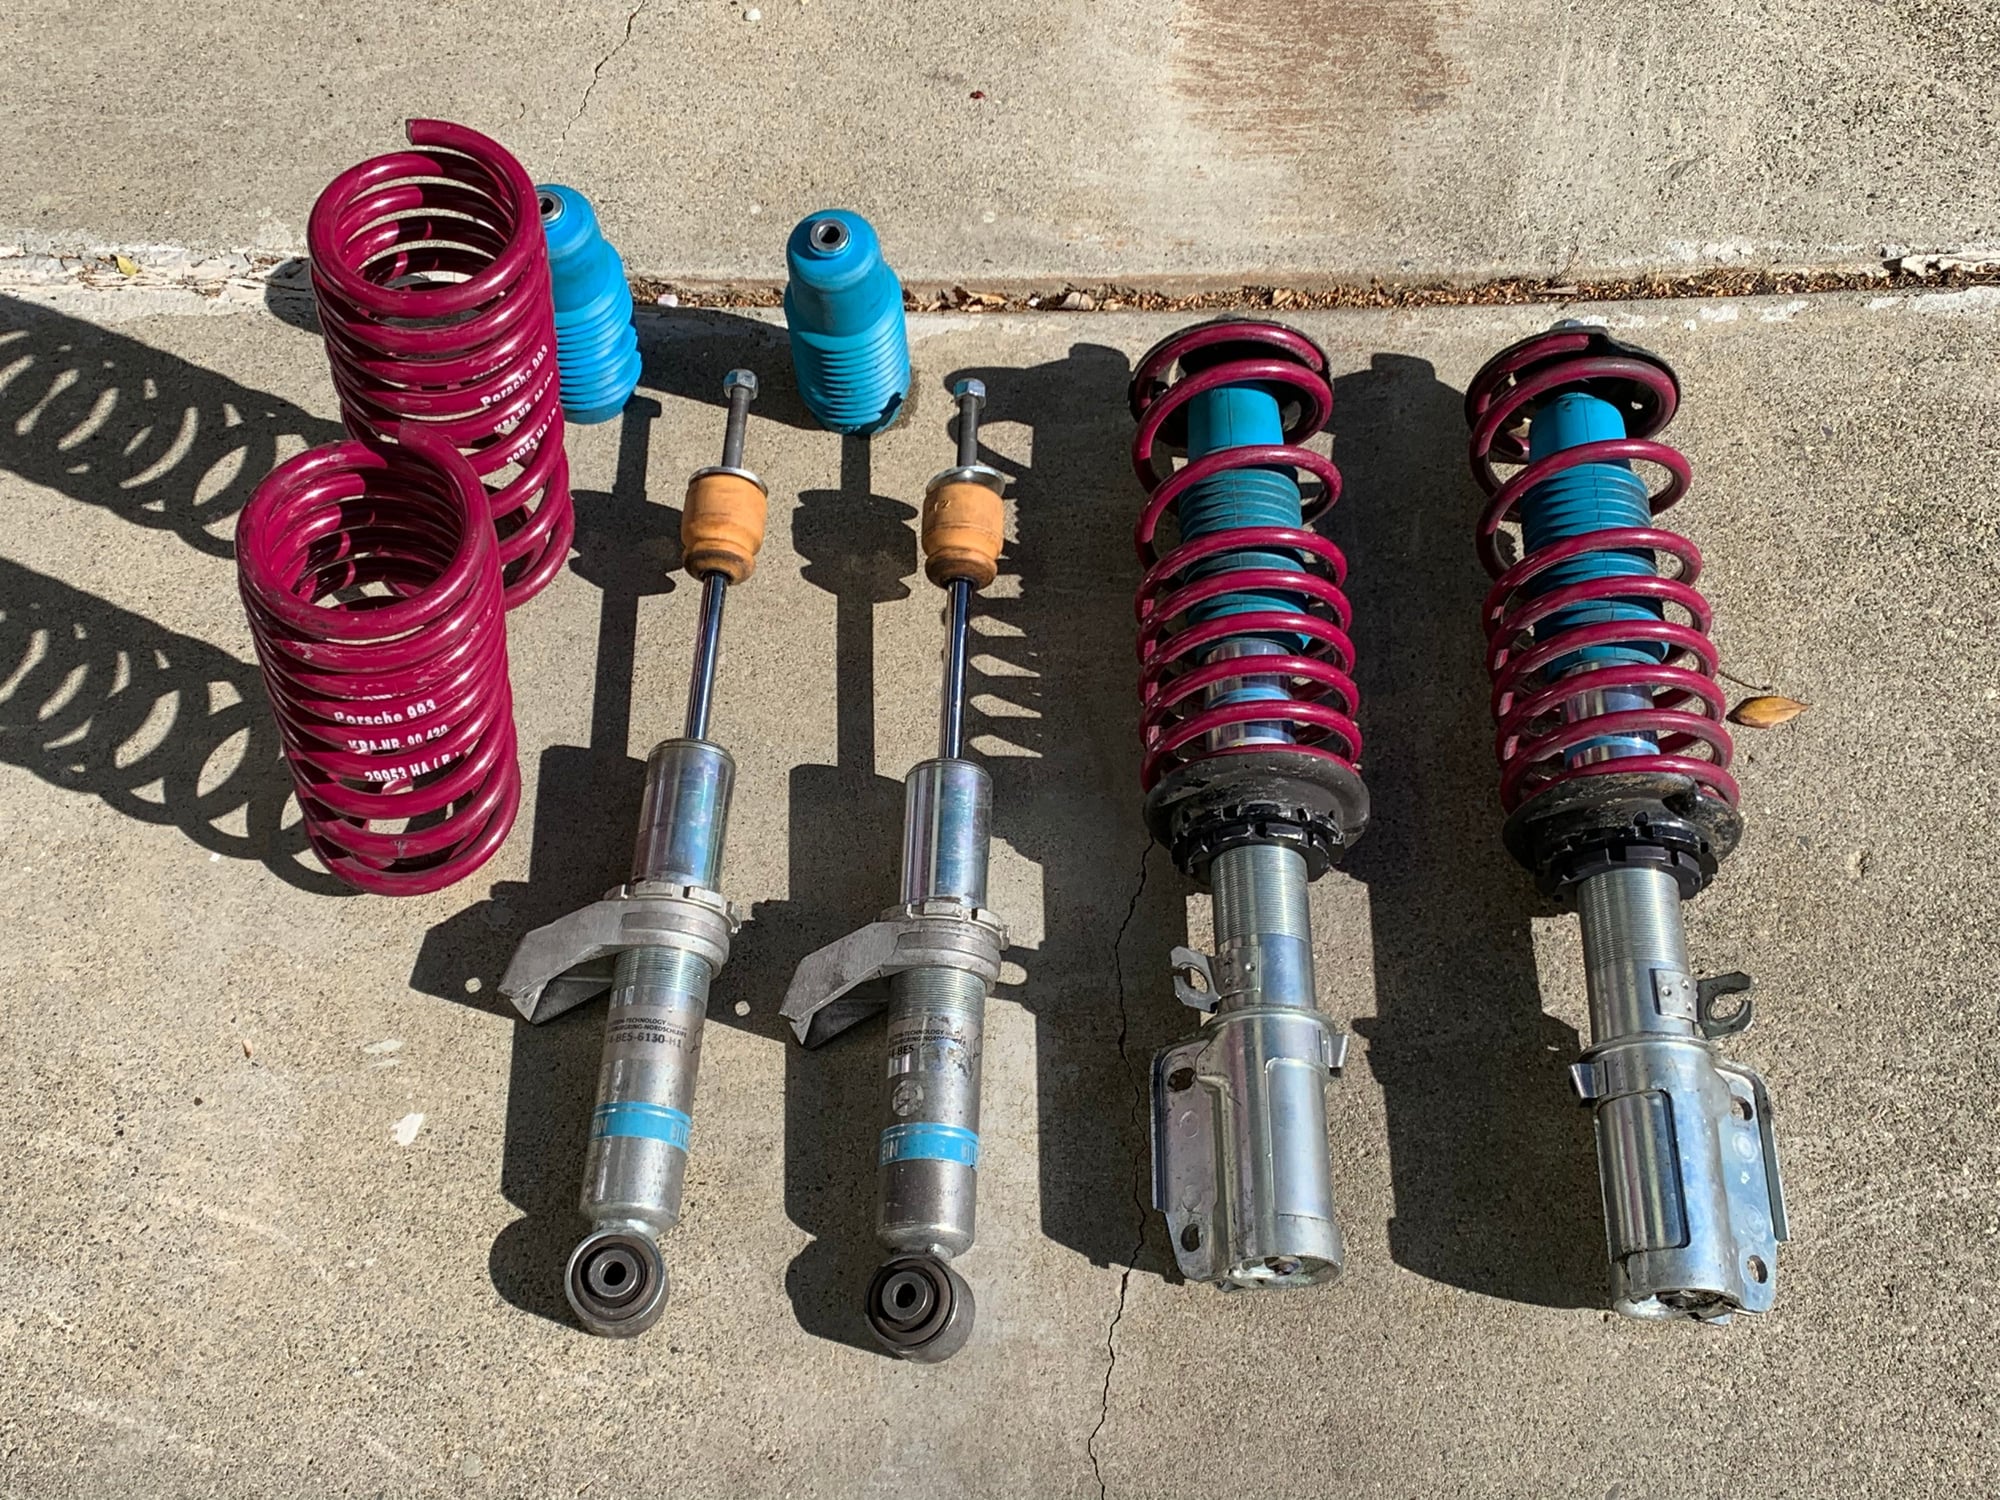 Steering/Suspension - Bilstein HD B6 and H&R coils - Used - 1995 to 1998 Porsche 911 - Vacaville, CA 95688, United States